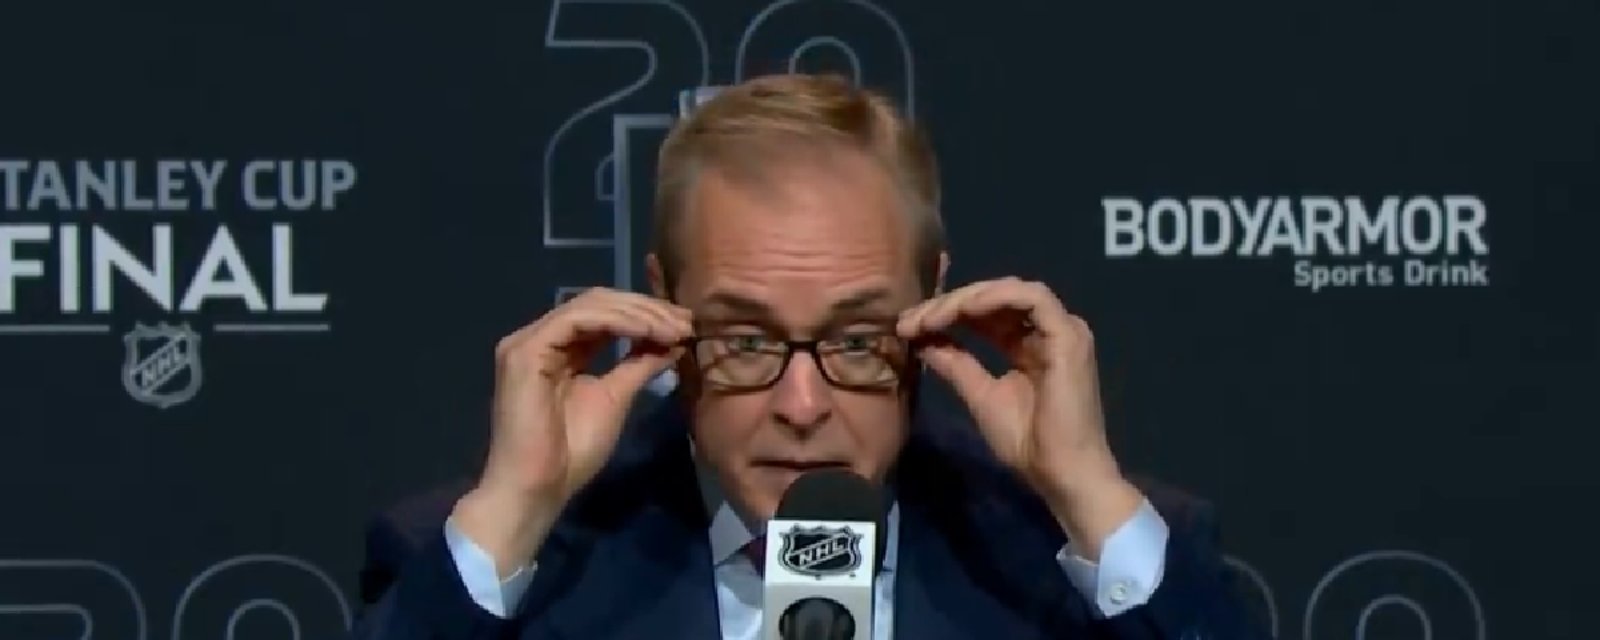 Paul Maurice reacts to controversial goal call in Game 6.